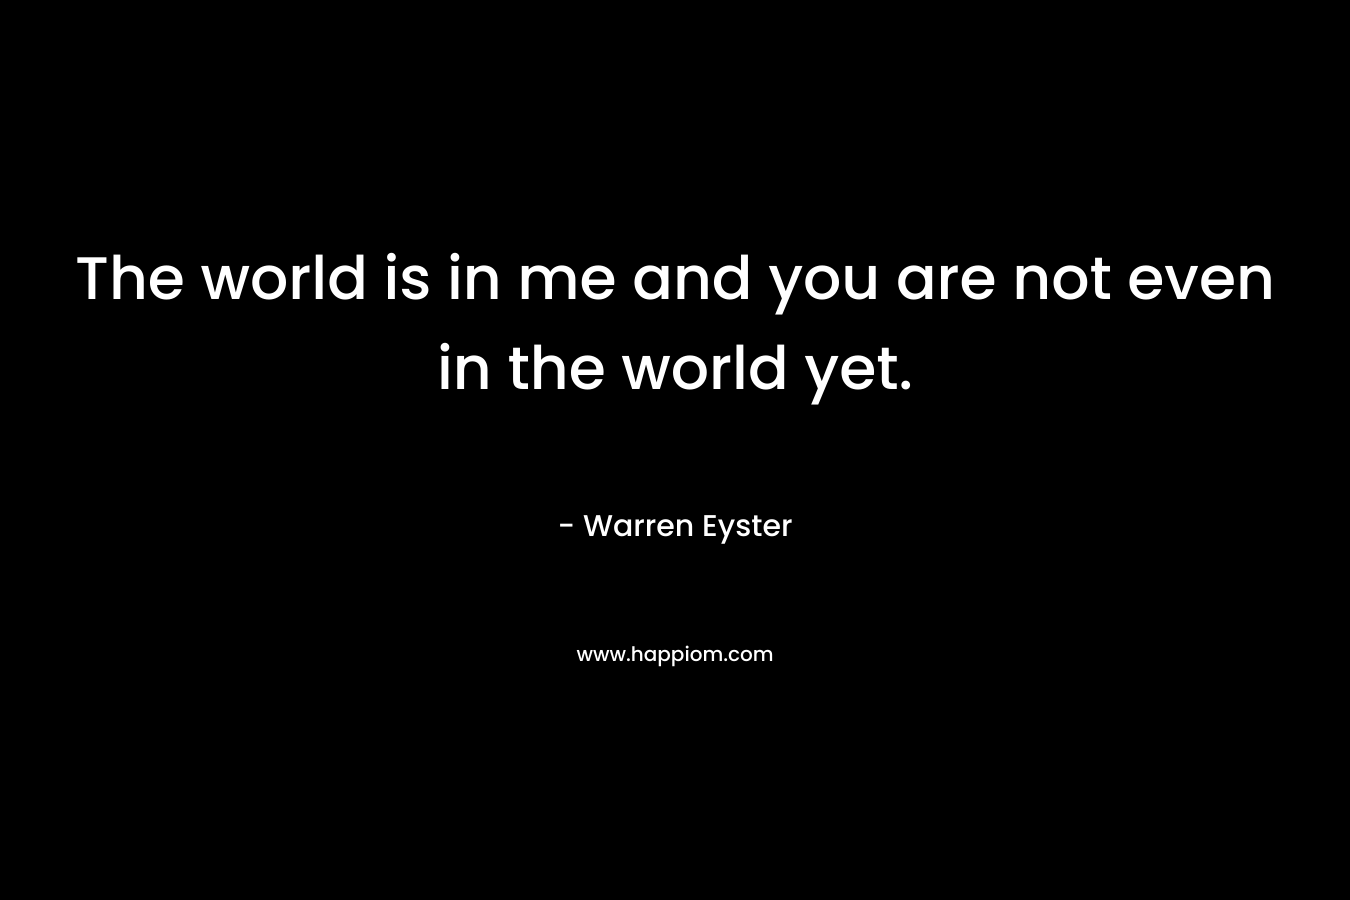 The world is in me and you are not even in the world yet.